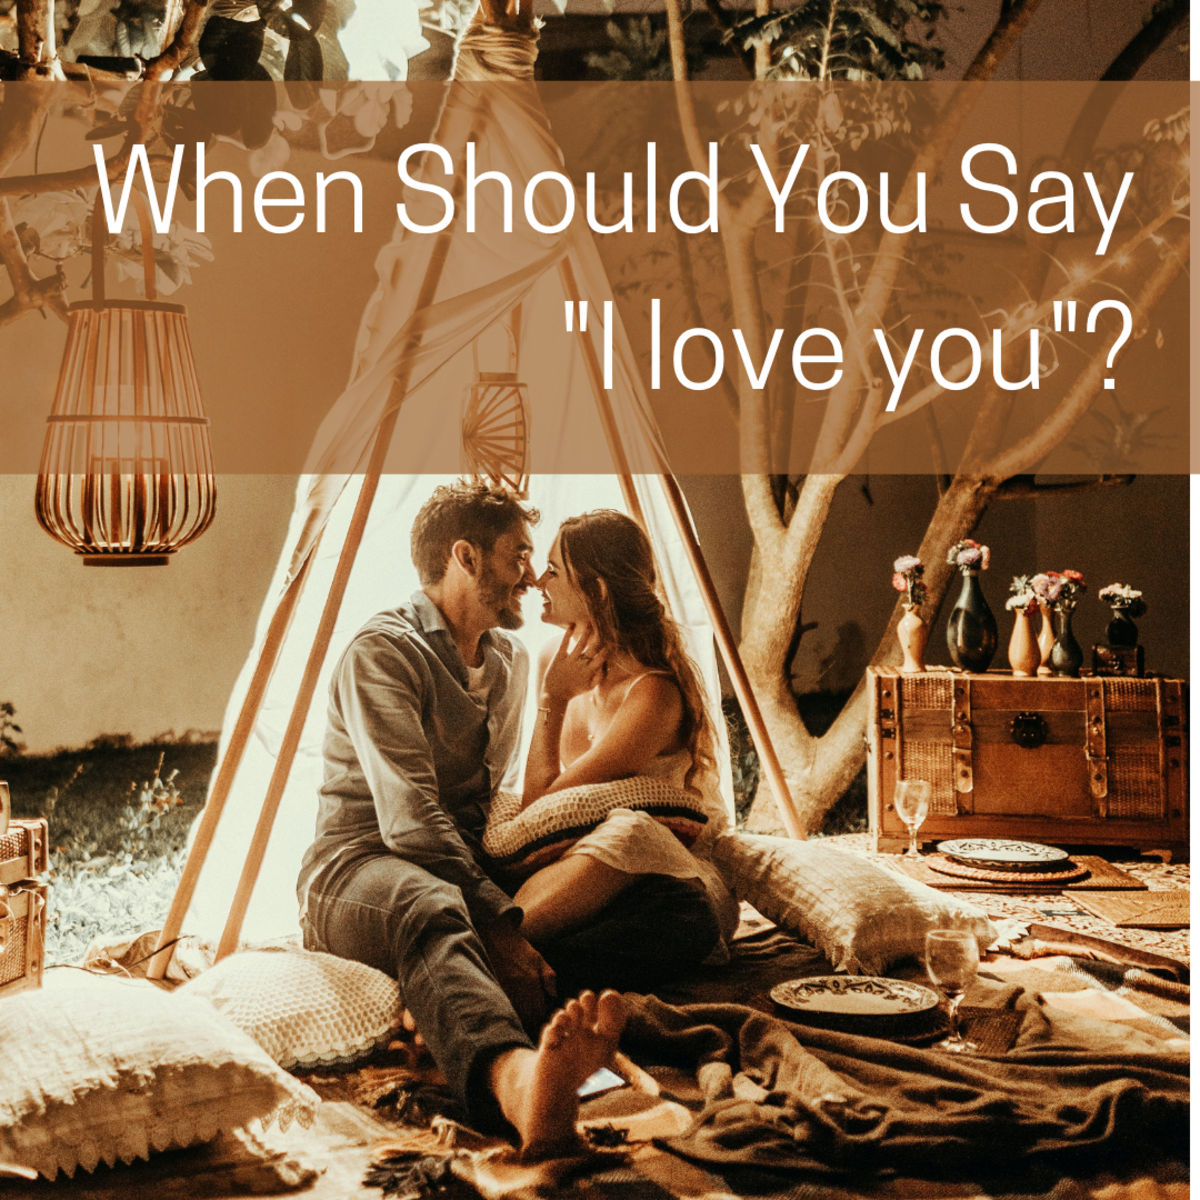 When should you say "I love you"?